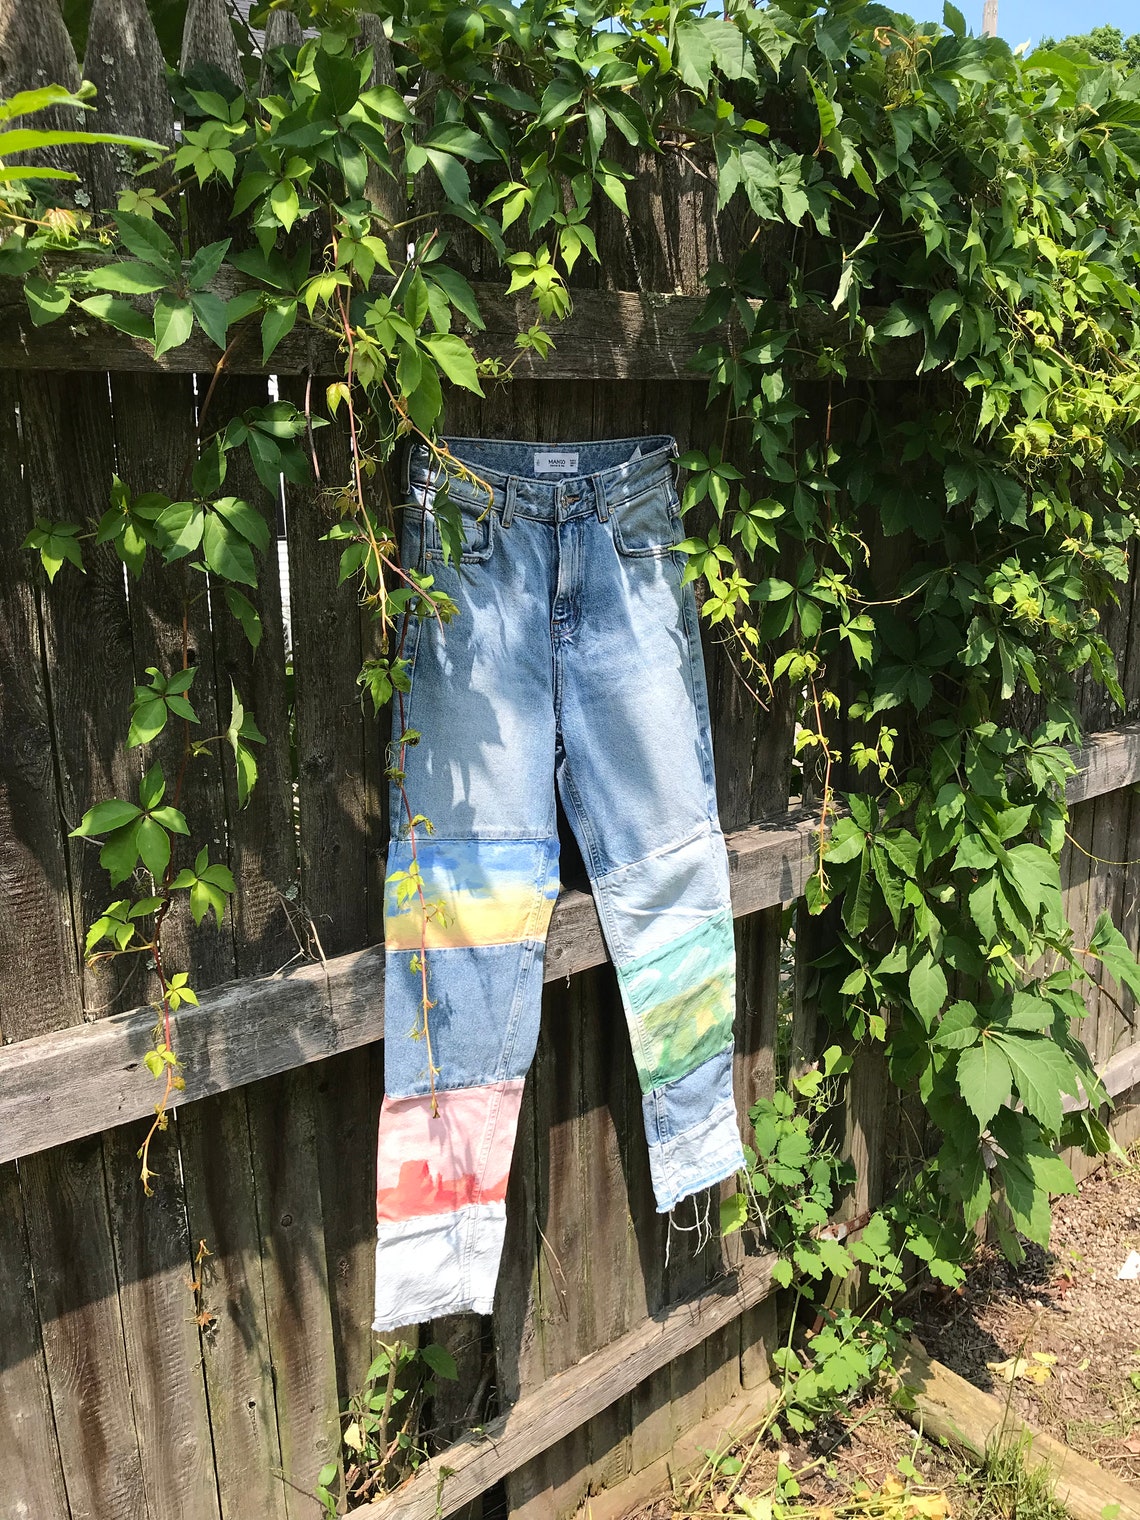 Painted Jeans - Etsy